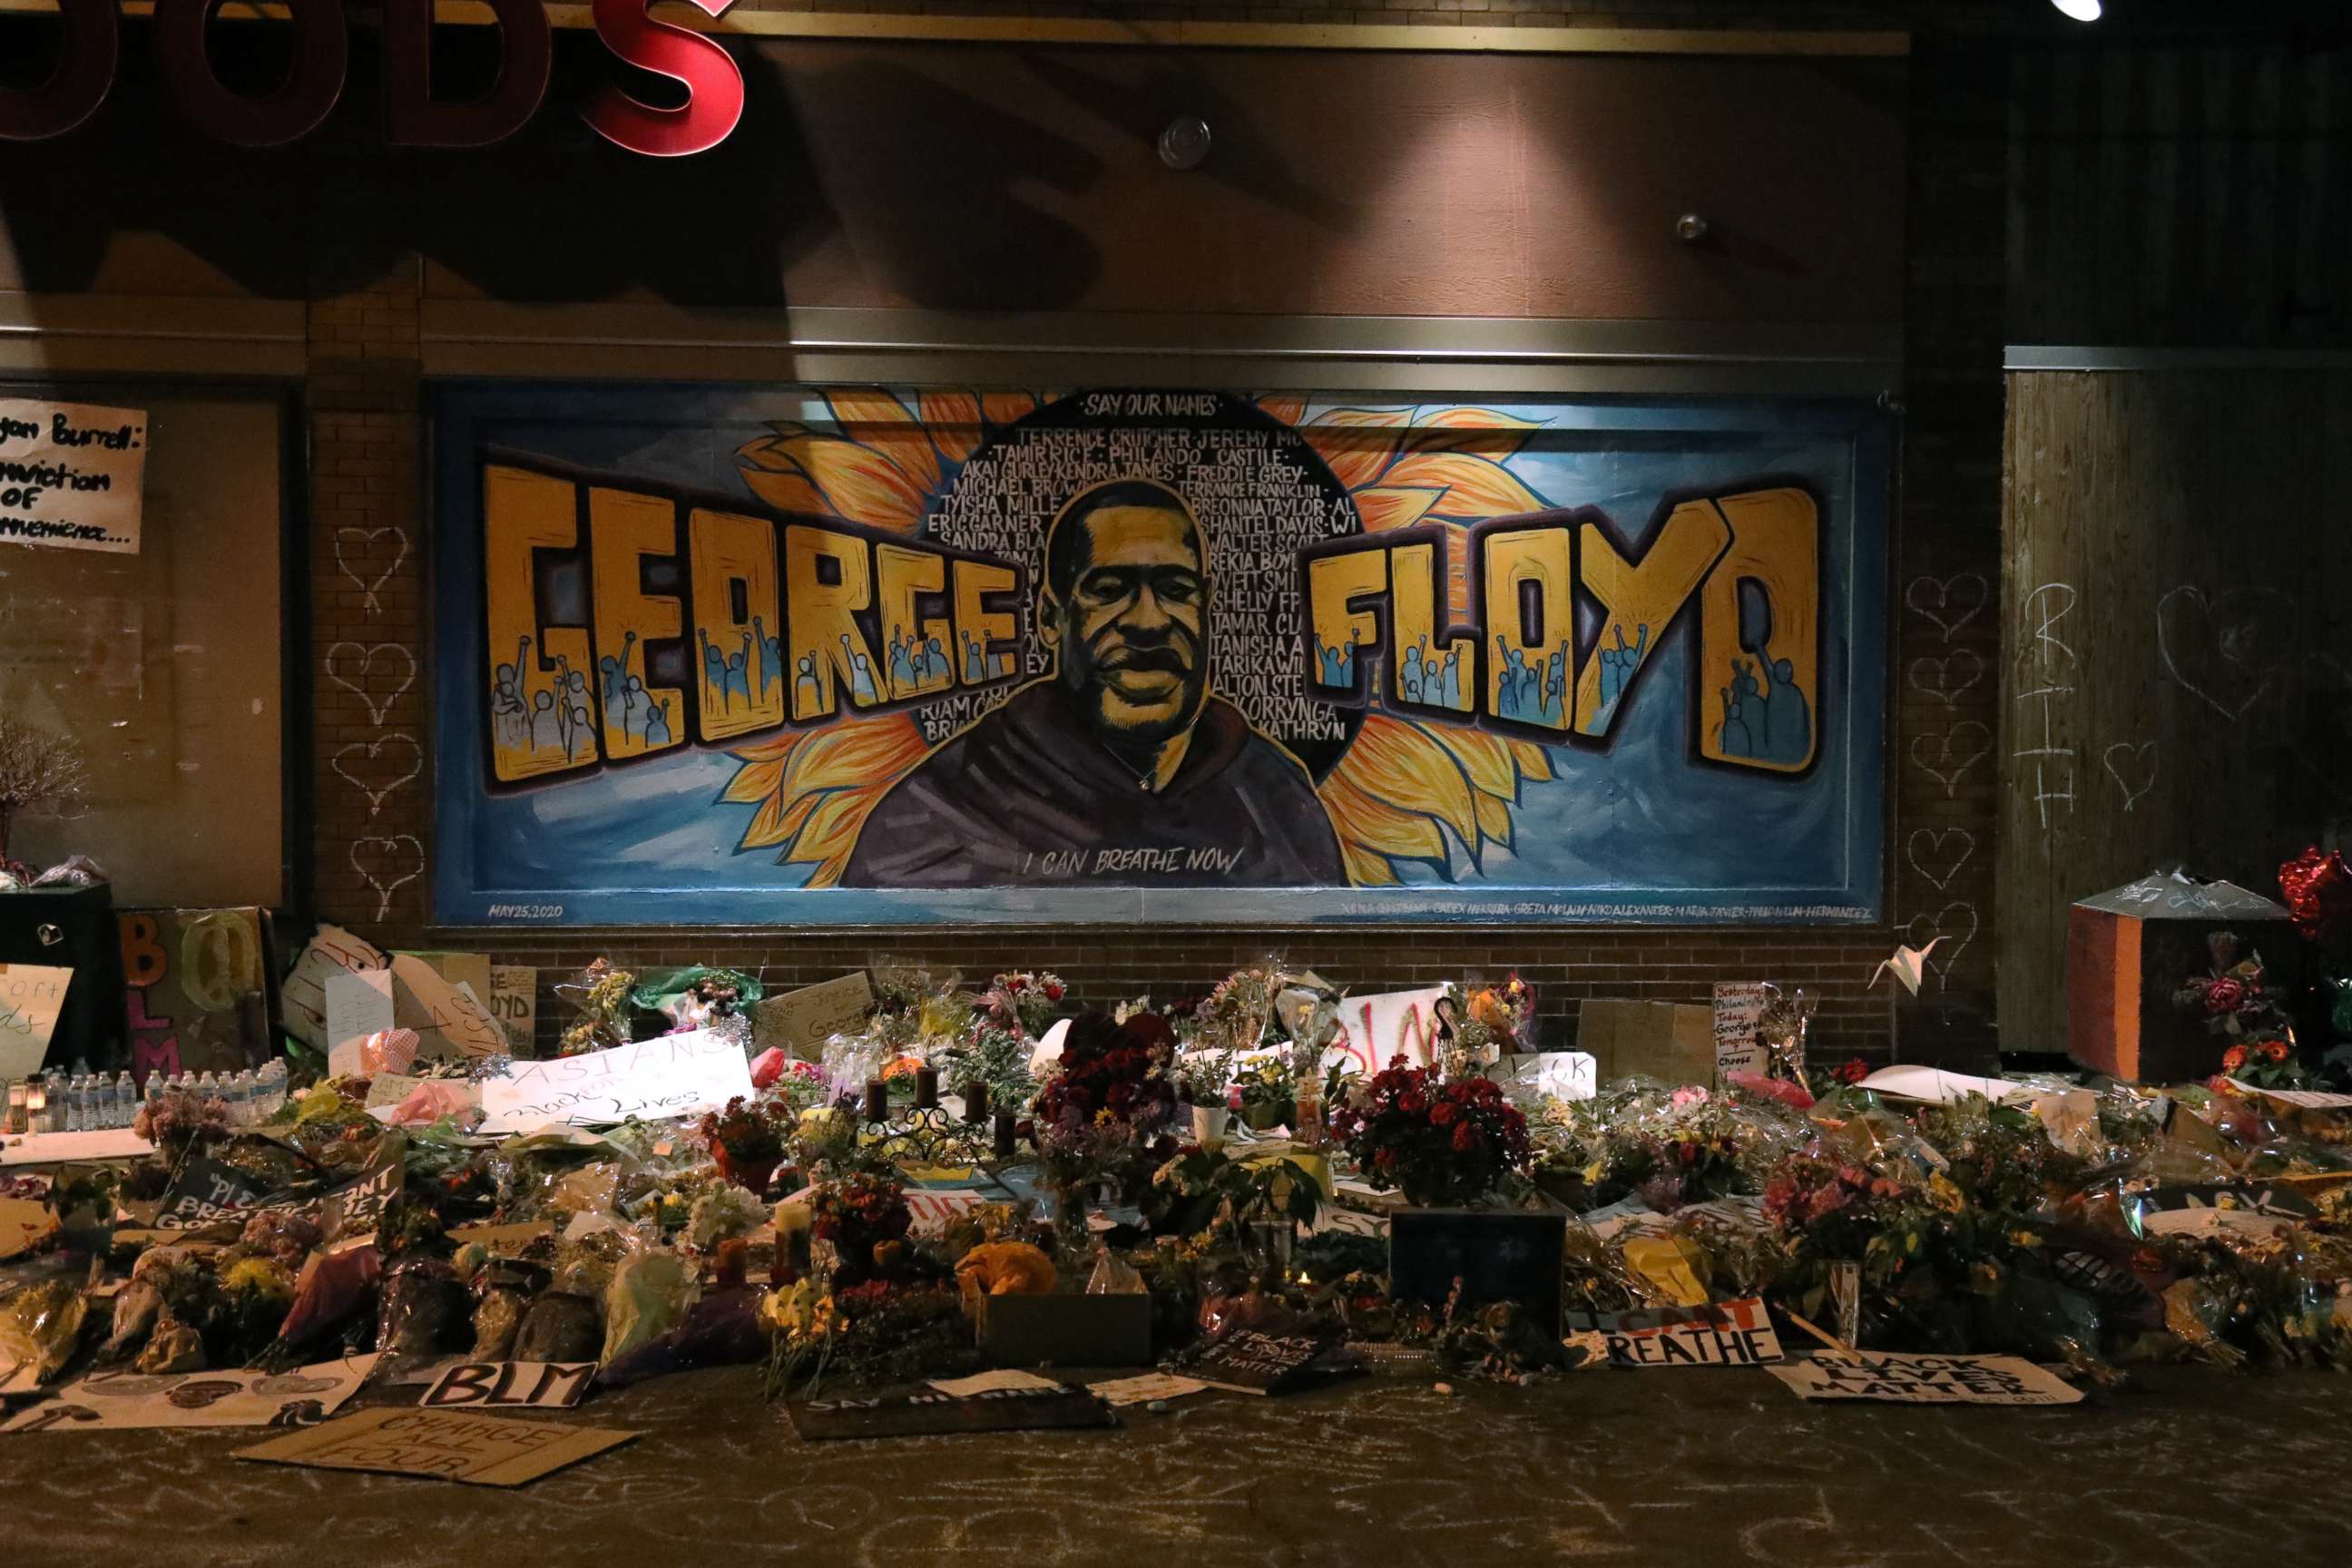 PHOTO: A memorial at the site where George Floyd died in Police custody in Minneapolis, May 31, 2020.